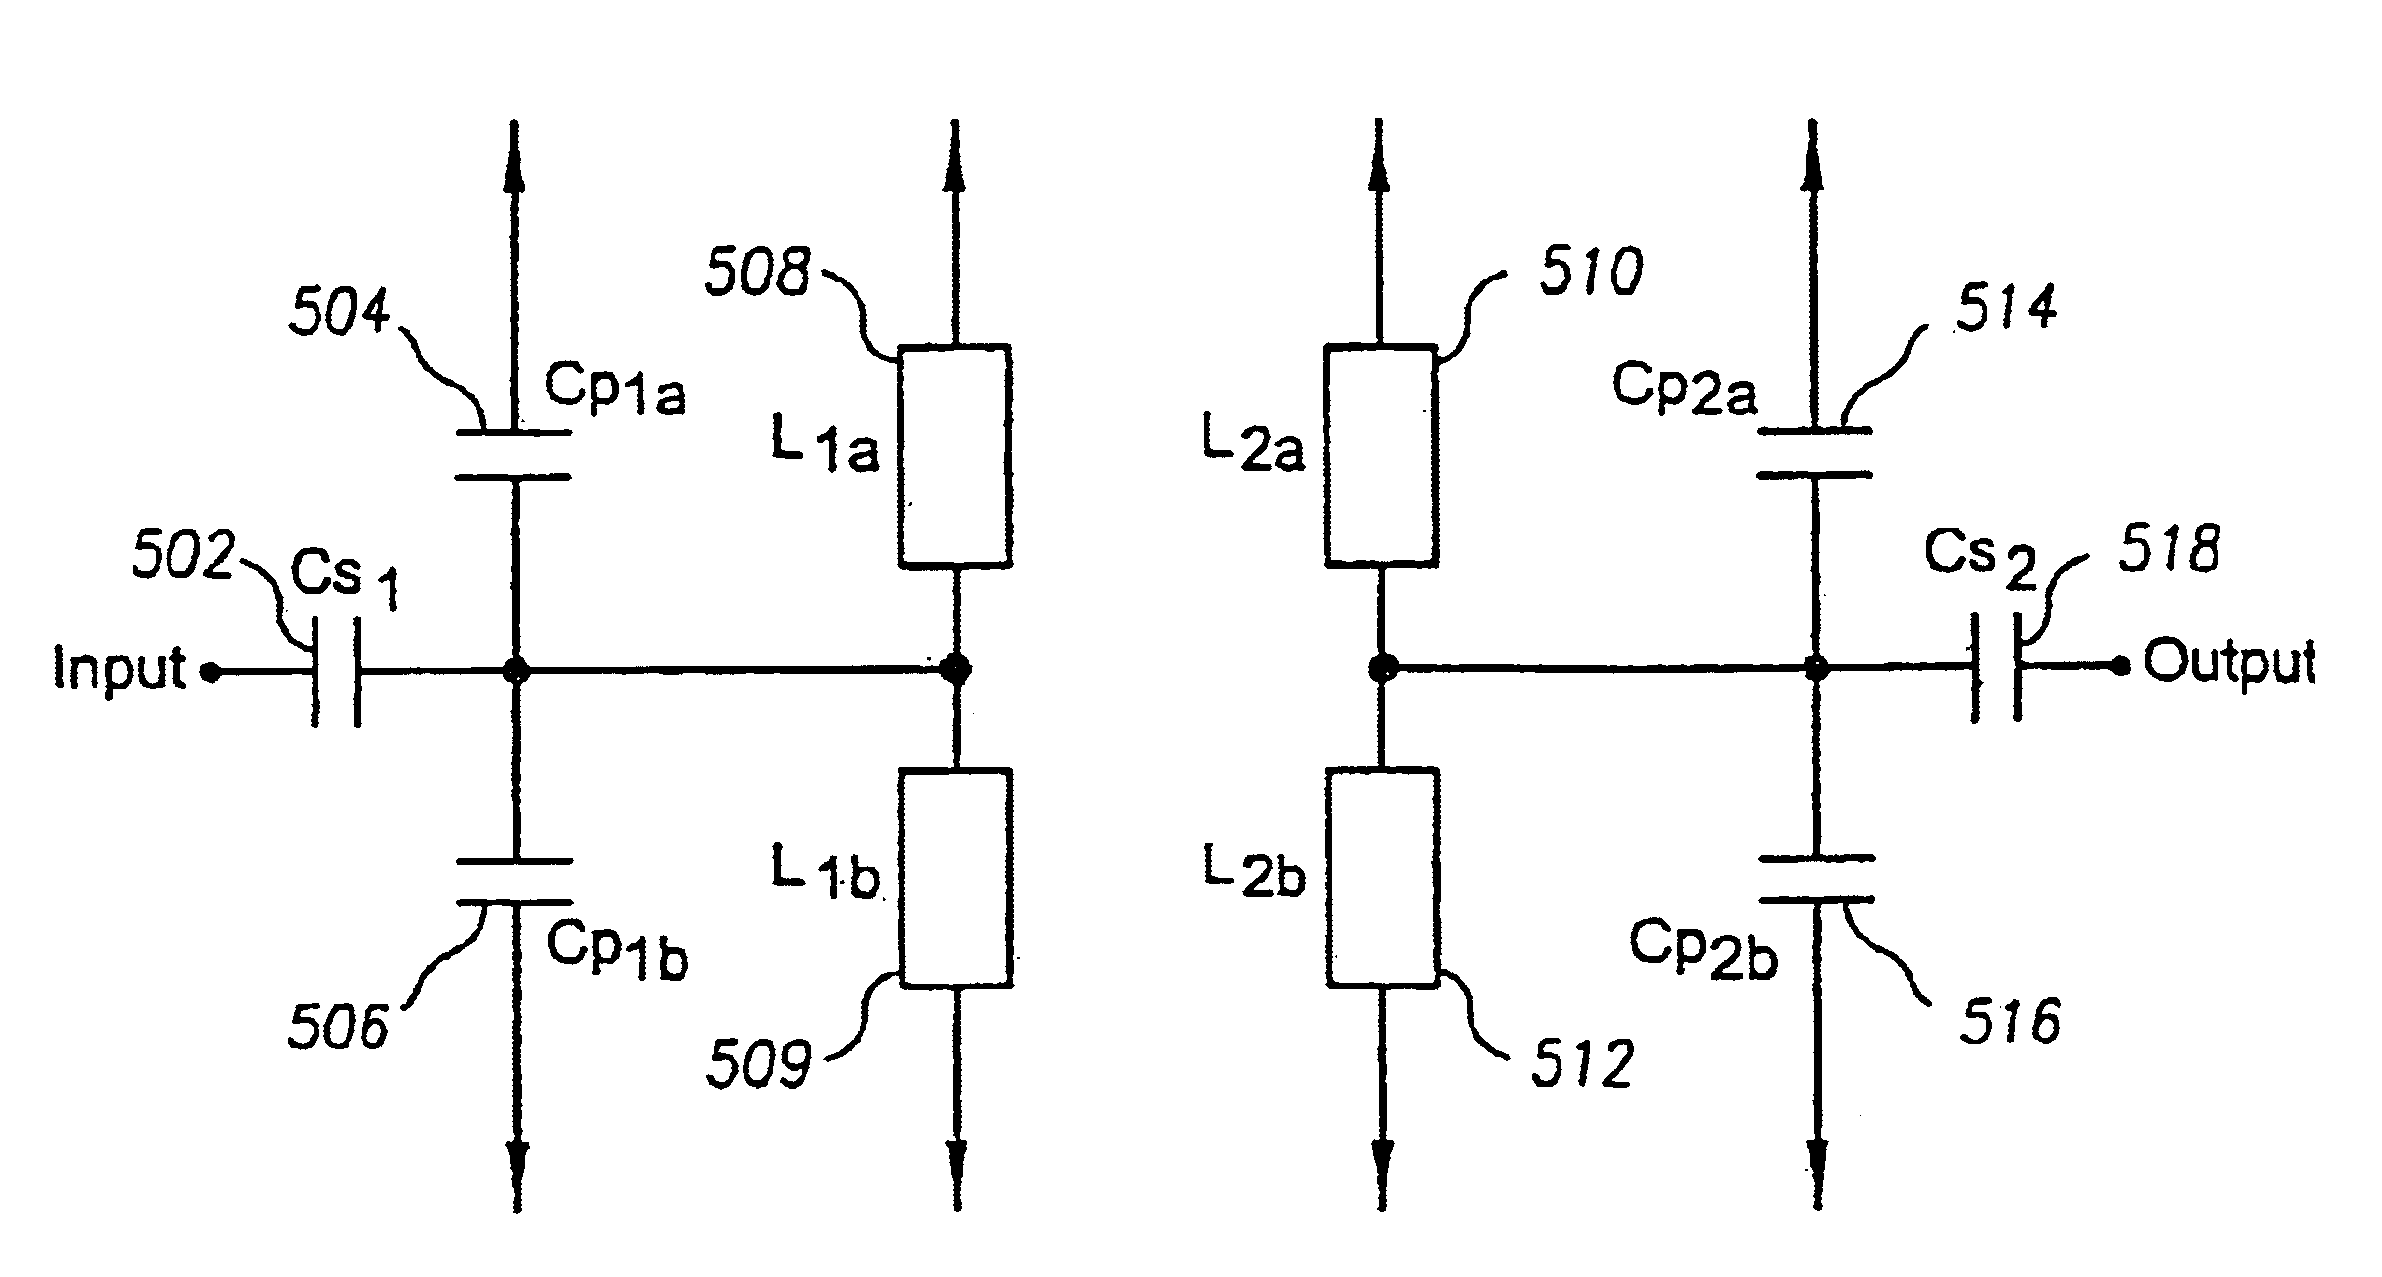 Narrow band-pass tuned resonator filter topologies having high selectivity, low insertion loss and improved out-of-band rejection over extended frequency ranges